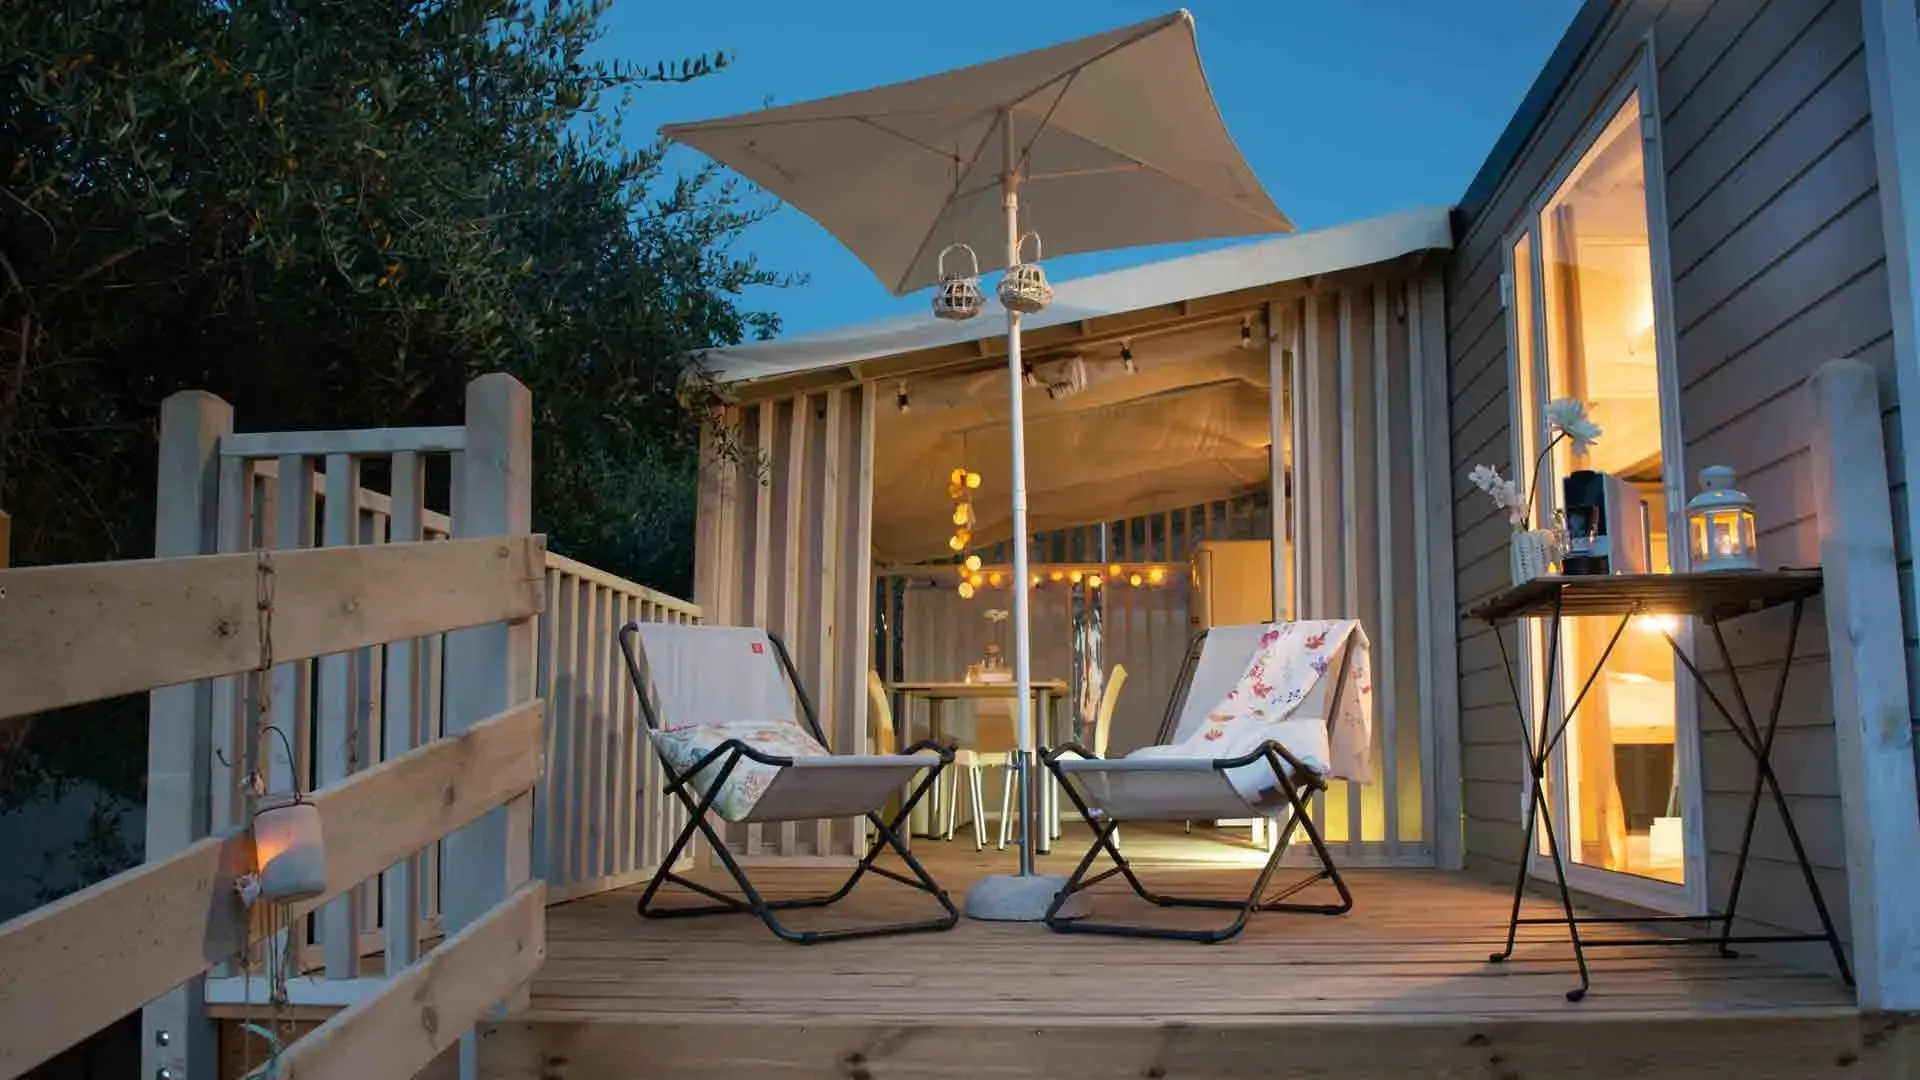 Vacanza glamping in due